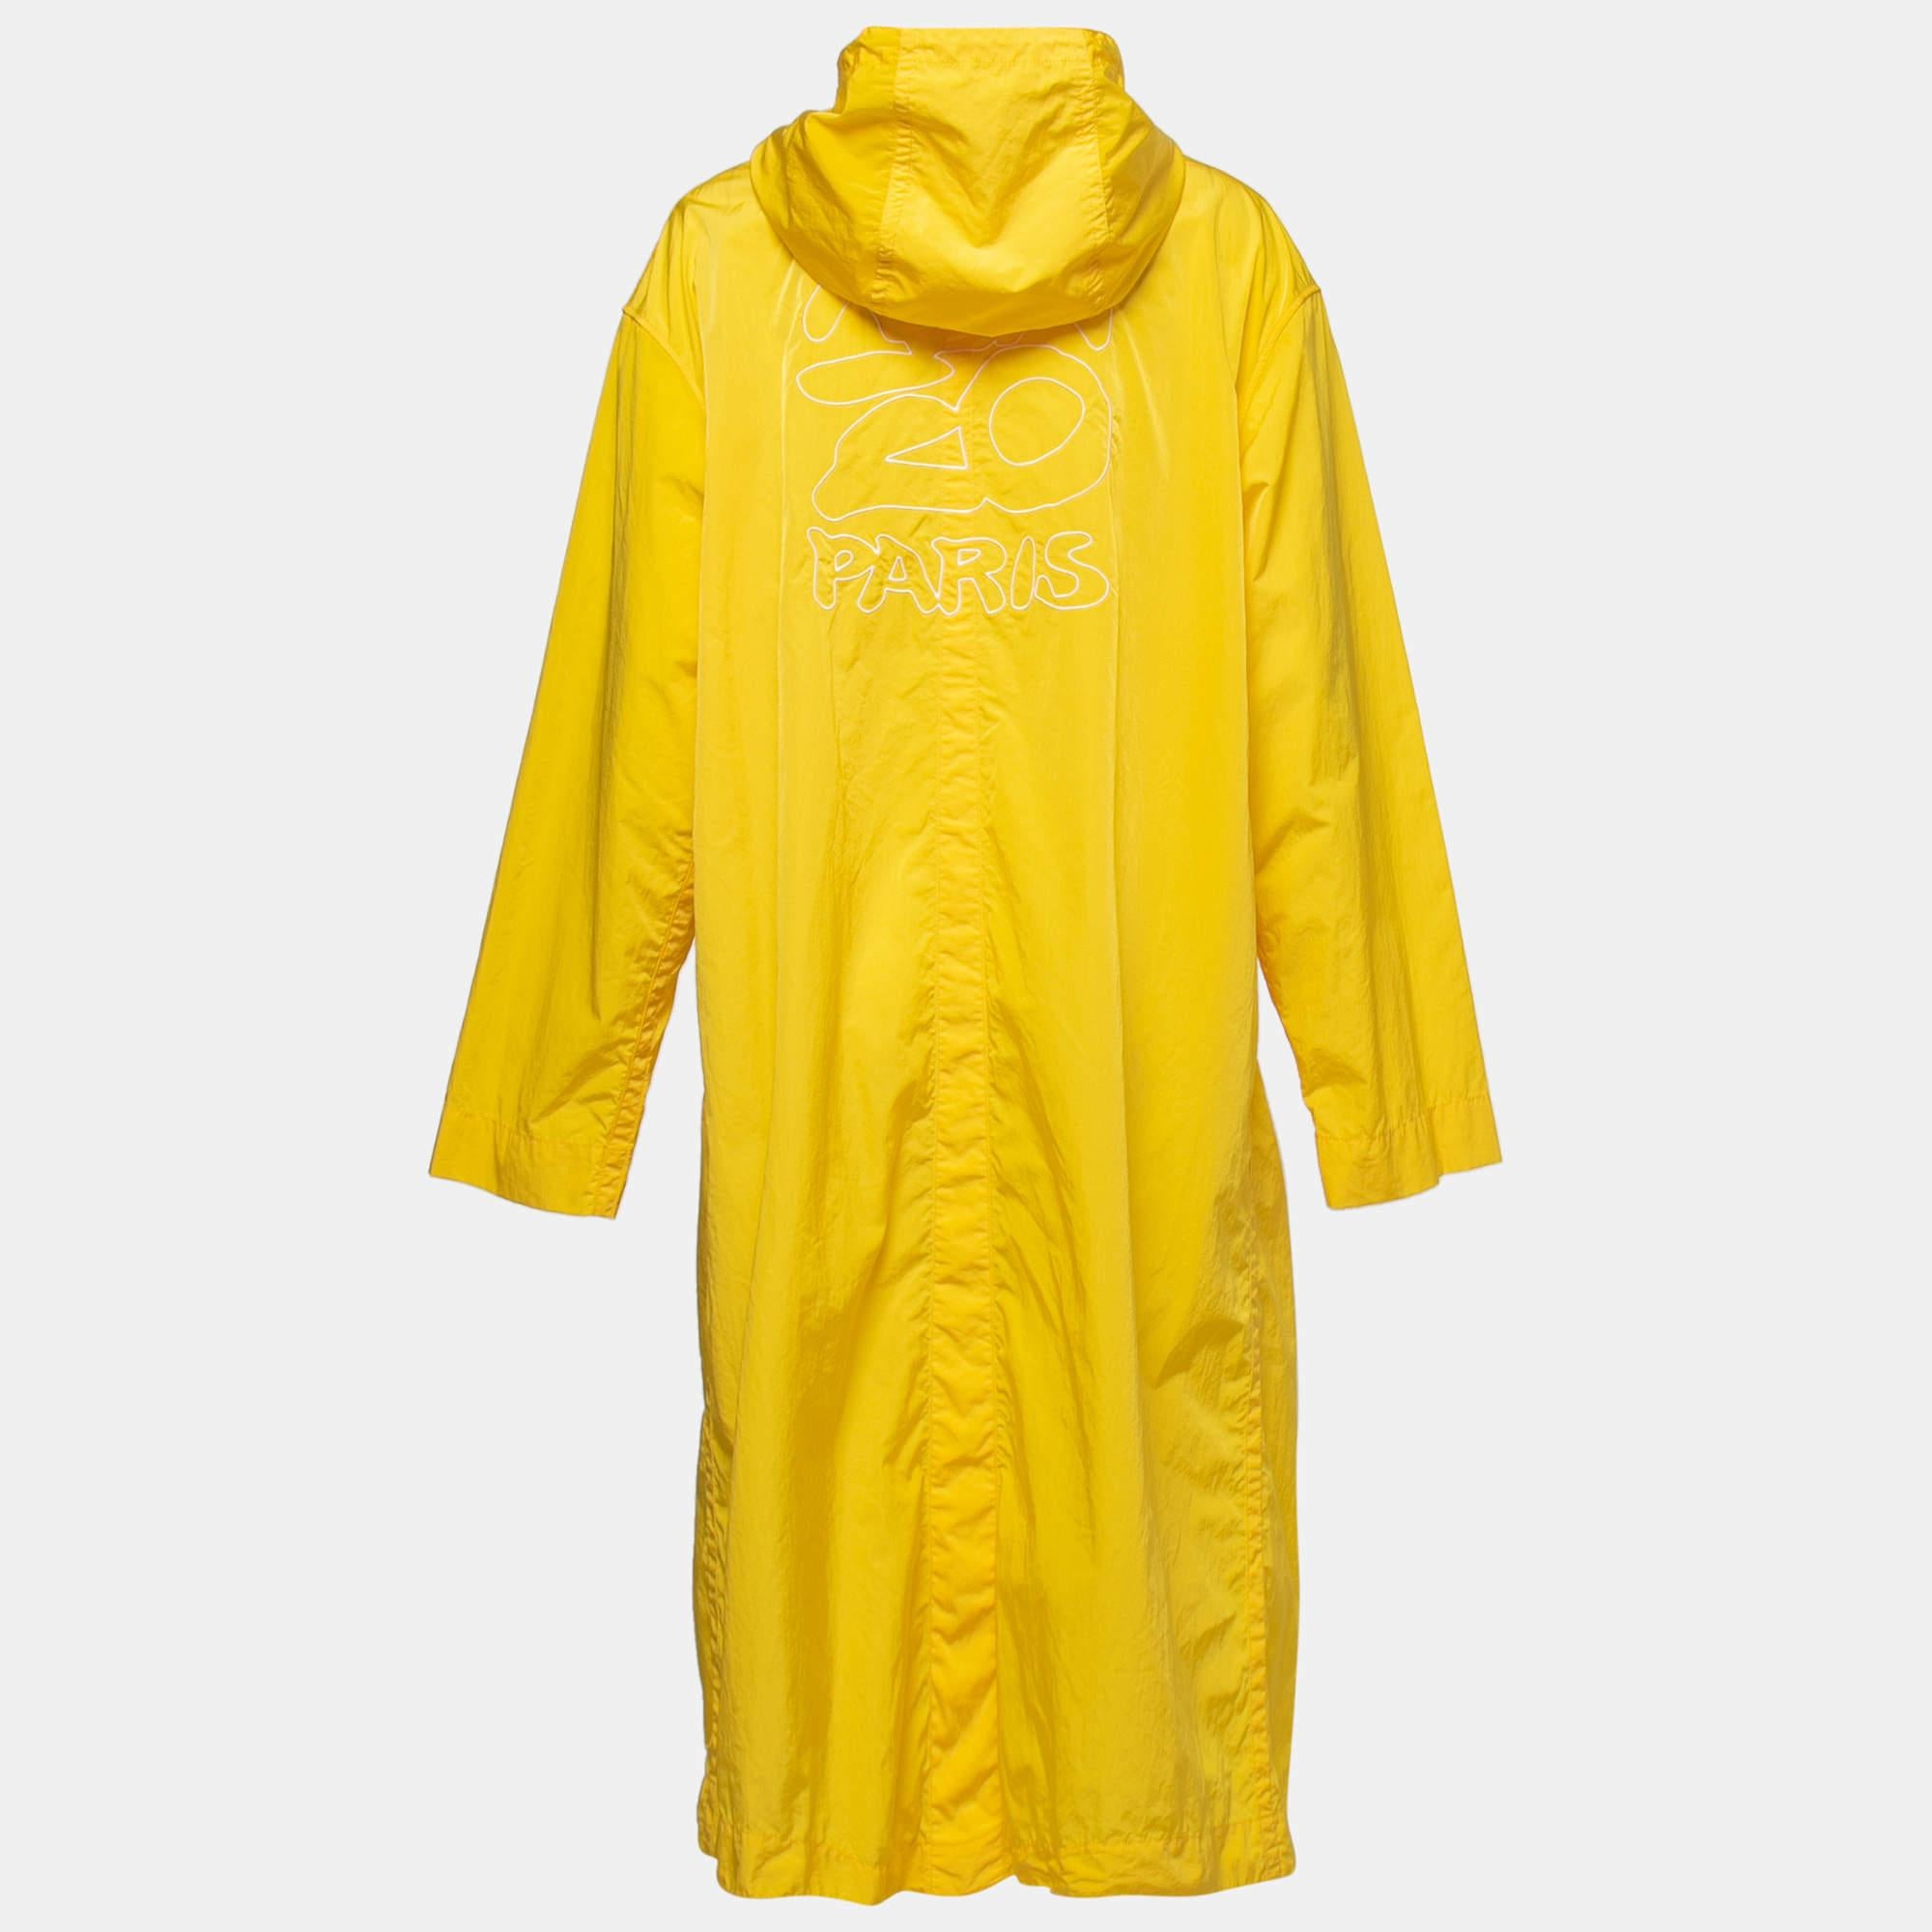 Kenzo brings this super-functional and durable raincoat to protect your outfit during the monsoon season. Designed using yellow synthetic fabric, this raincoat is equipped with a hoodie, buttoned closures, and long sleeves. This helpful accessory is